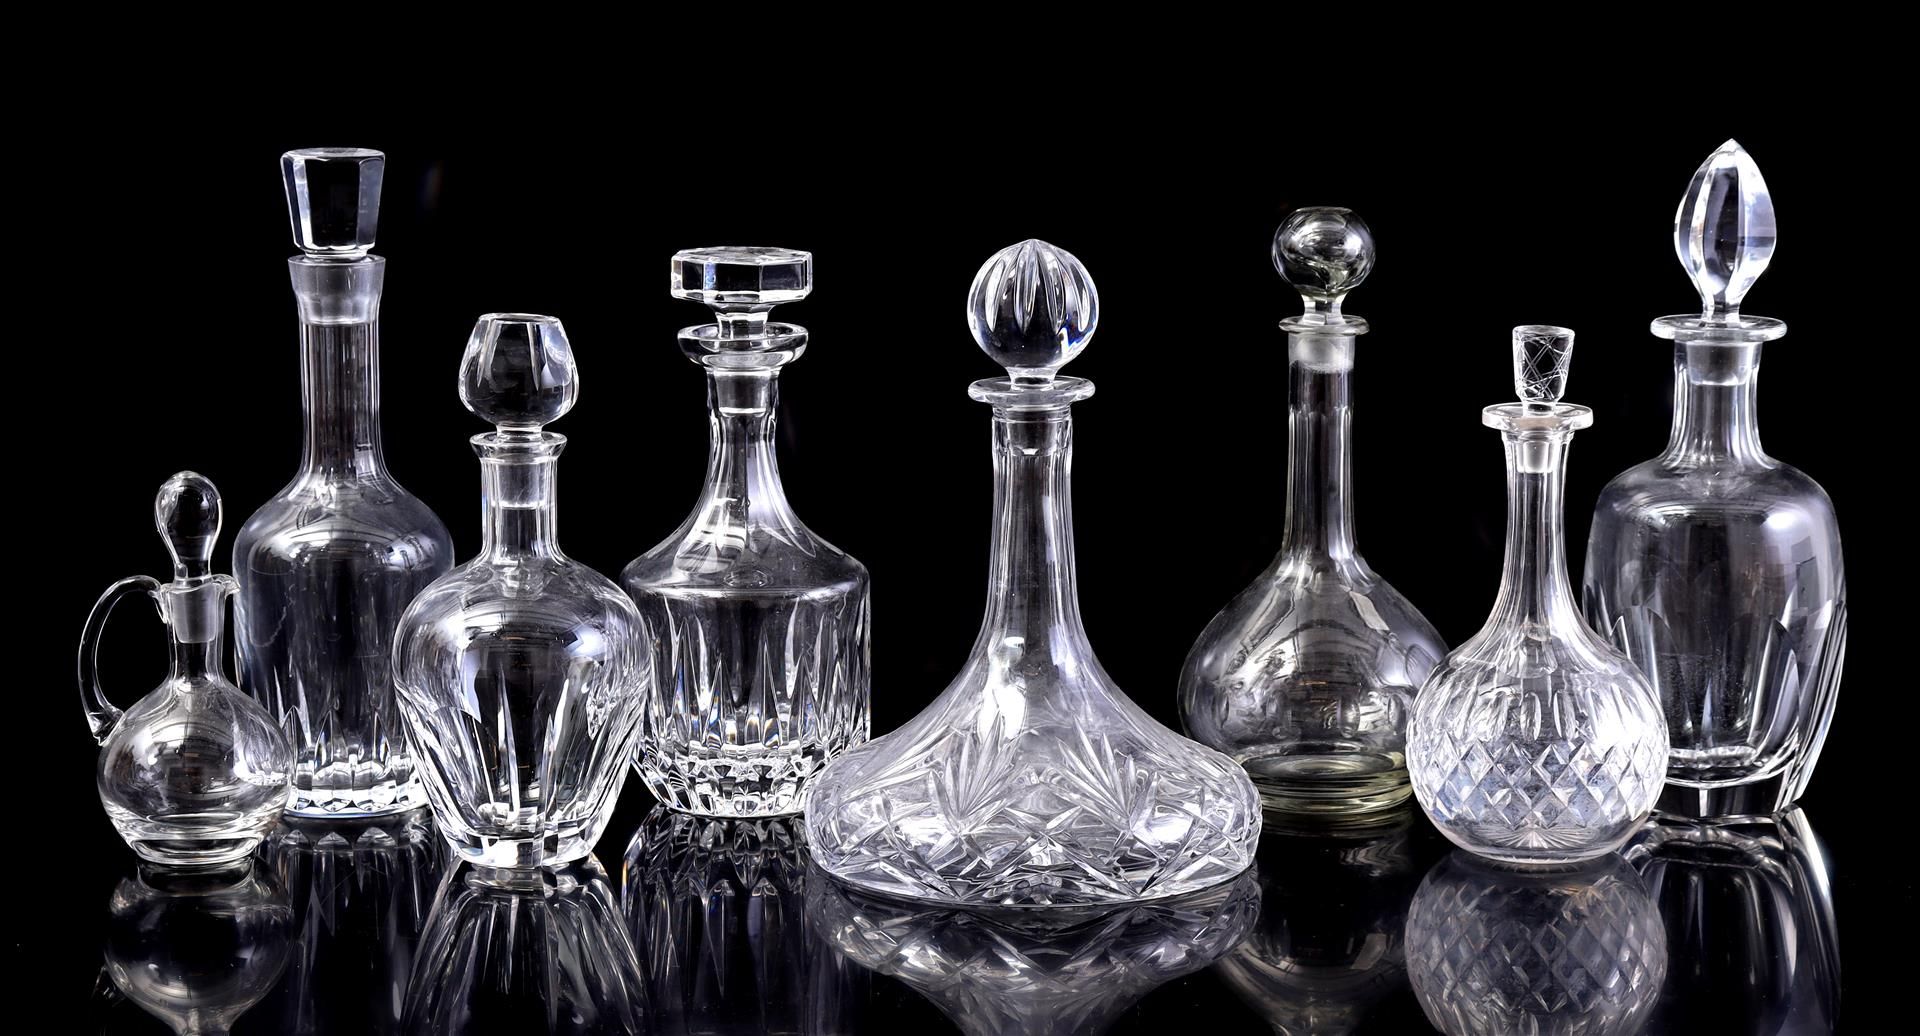 8 various glass and crystal carafes